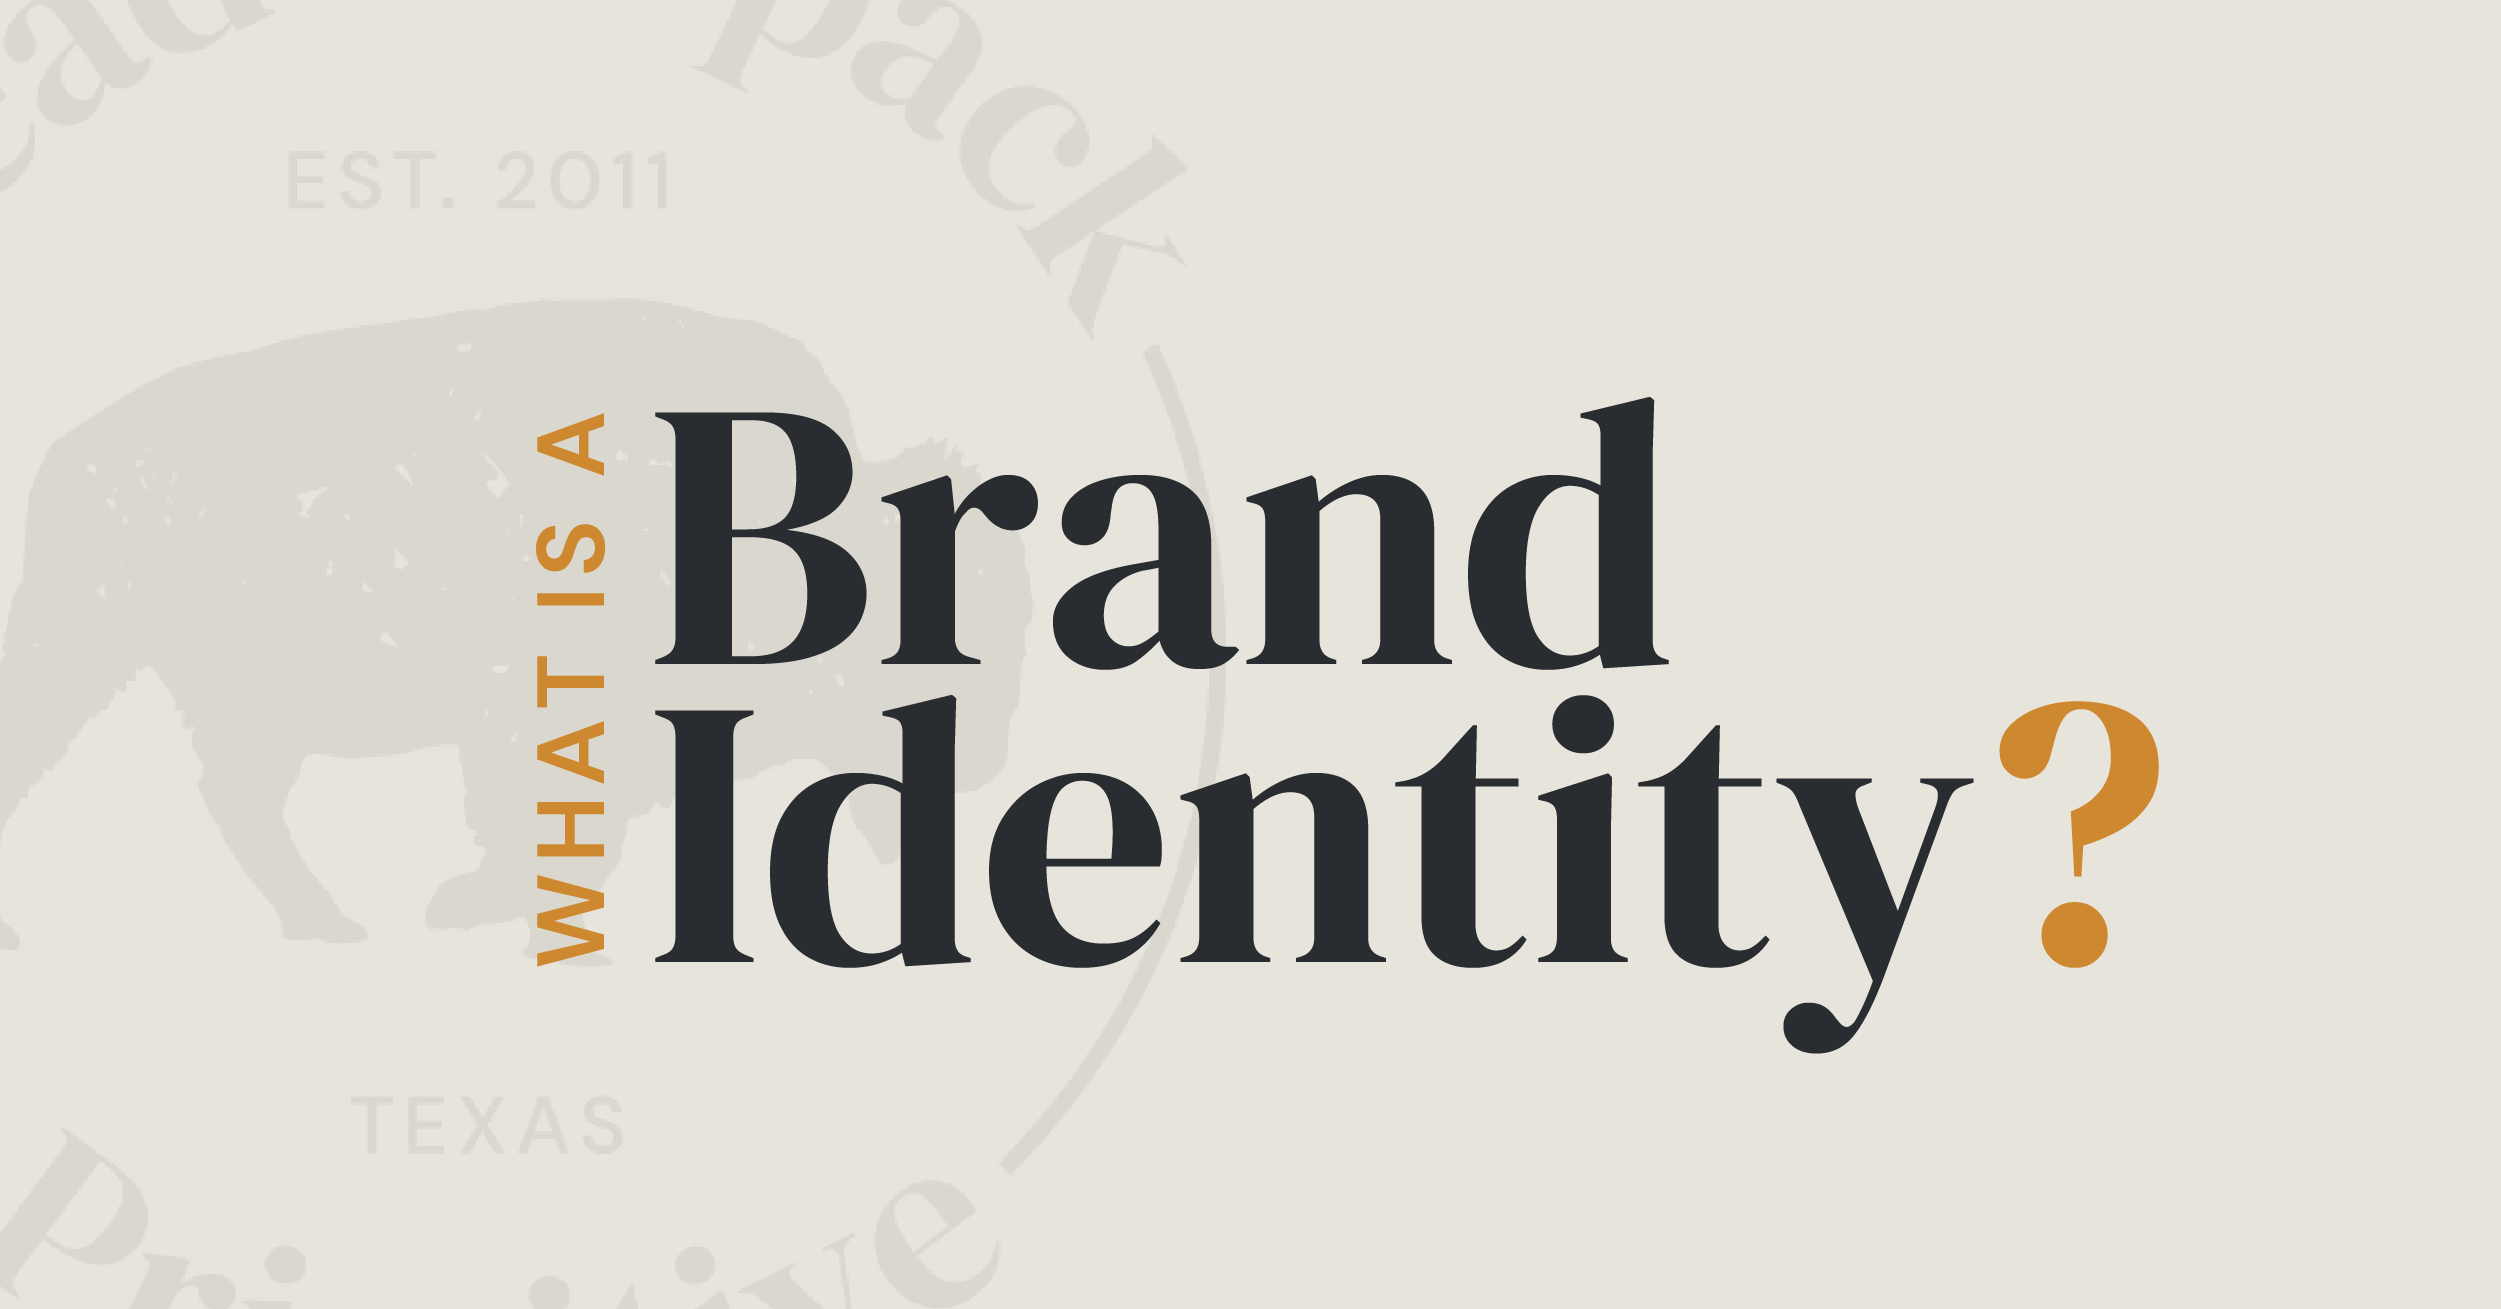 What is a brand identity